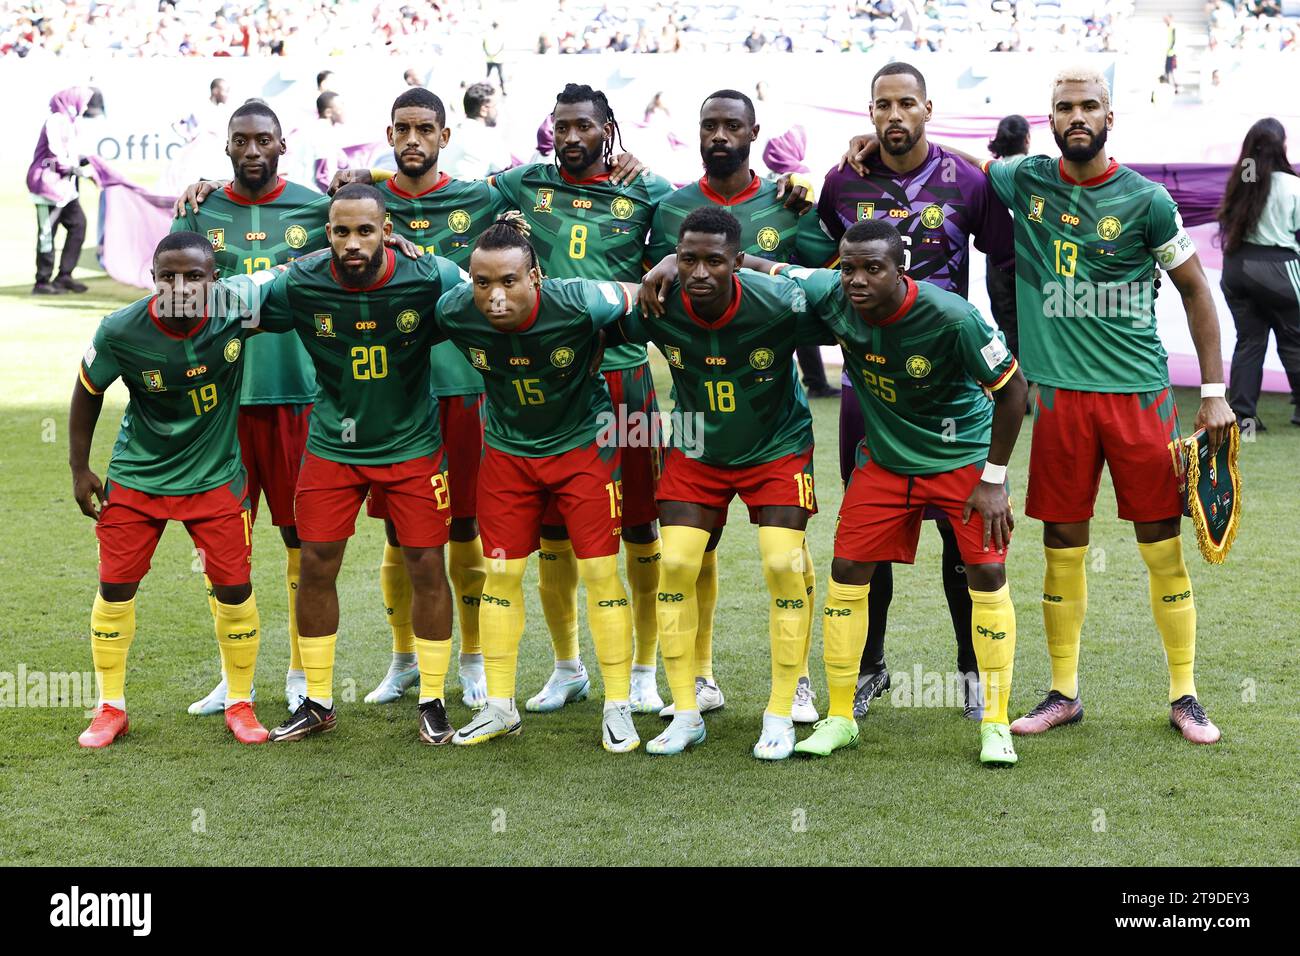 AL WAKRAH - (Top Row L-R) Karl Toko Ekambi of Cameroon, Jean-Charles Castelletto of Cameroon, Andre-Frank Zambo Anguissa of Cameroon, Nicolas N Koulou of Cameroon, Cameroon goalkeeper Devis Epassy, Eric Maxim Choupo-Moting of Cameroon(Front row L-R) Collins Fai of Cameroon, Bryan Mbeumo of Cameroon, Pierre Kunde of Cameroon, Martin Hongla of Cameroon, Nouhou Tolo of Cameroon during the FIFA World Cup Qatar 2022 group G match between Cameroon and Serbia at Al Janoub Stadium on November 28, 2022 in Al Wakrah, Qatar. ANP | Hollandse Hoogte | MAURICE VAN STEEN Stock Photo